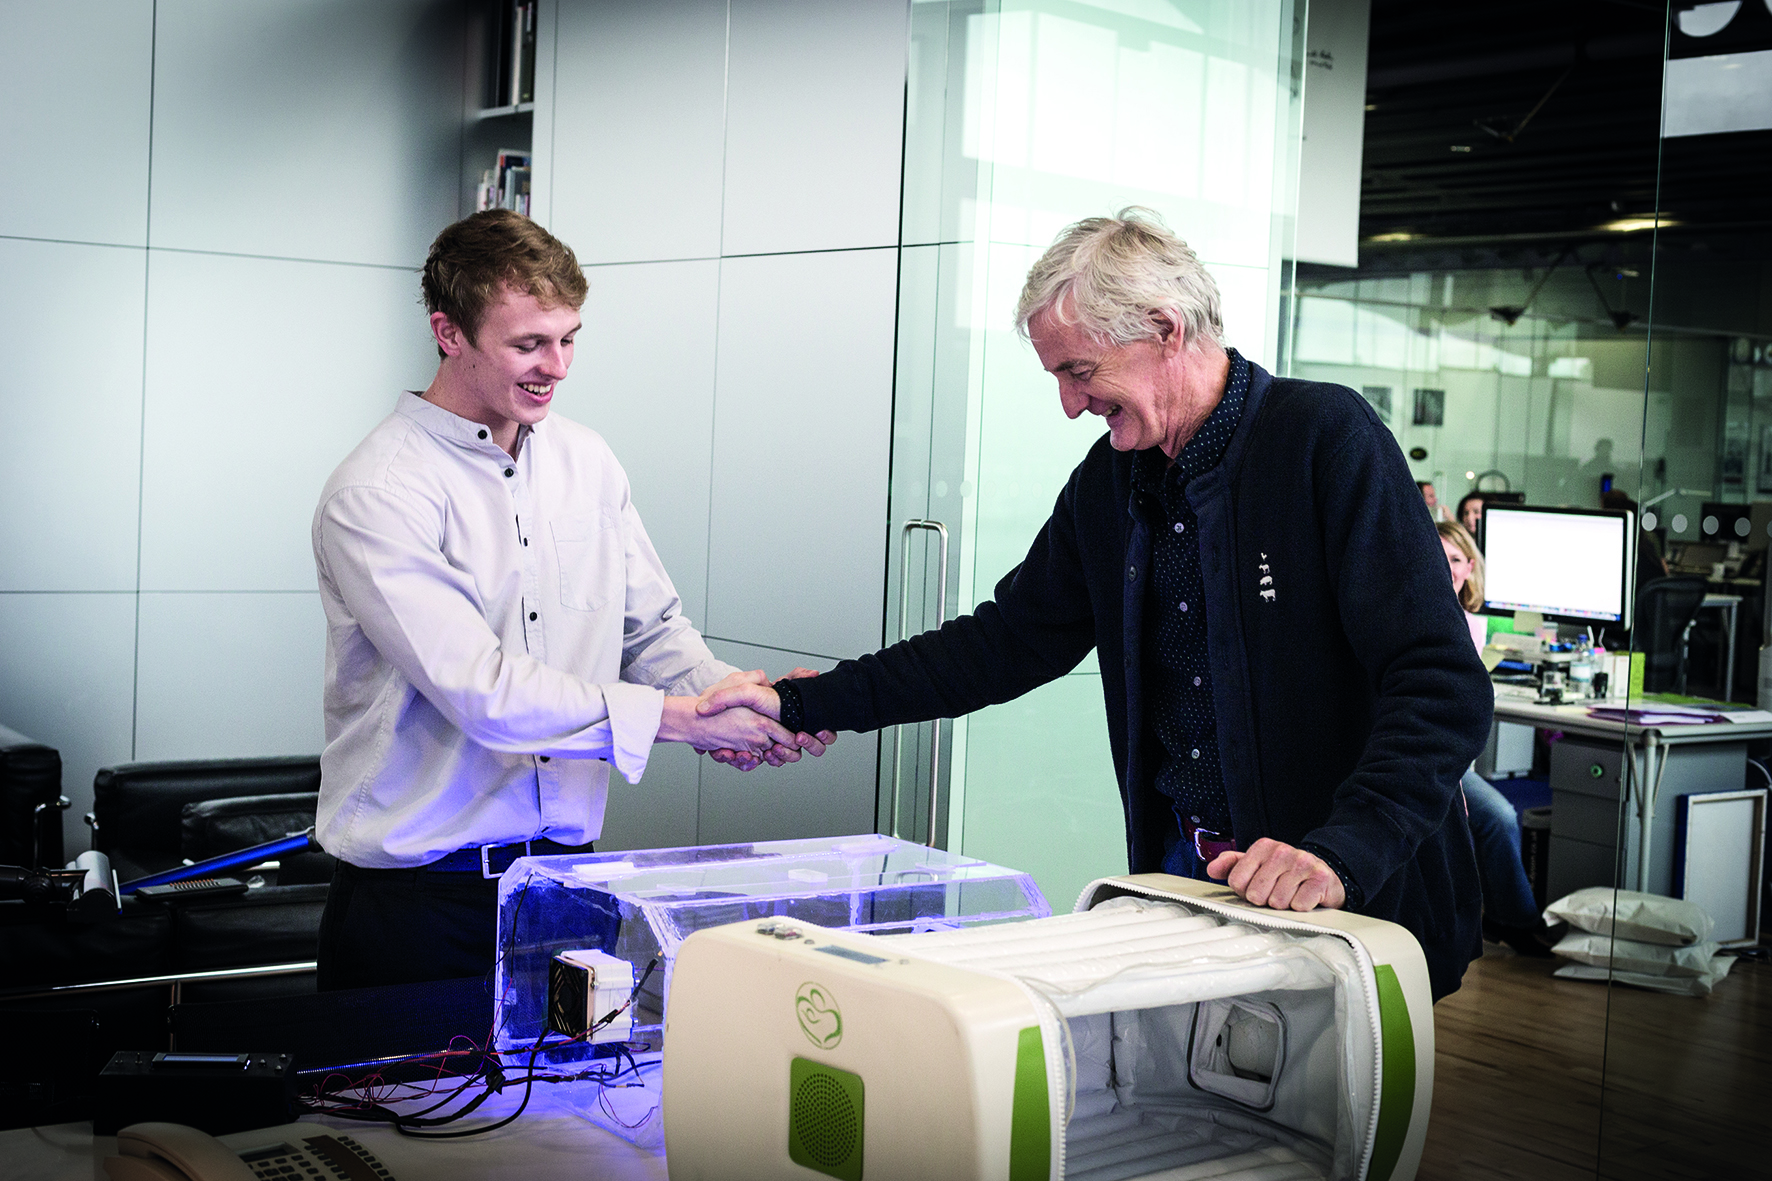 An Incubator Just Won The Dyson Award For Best Invention Of The Year